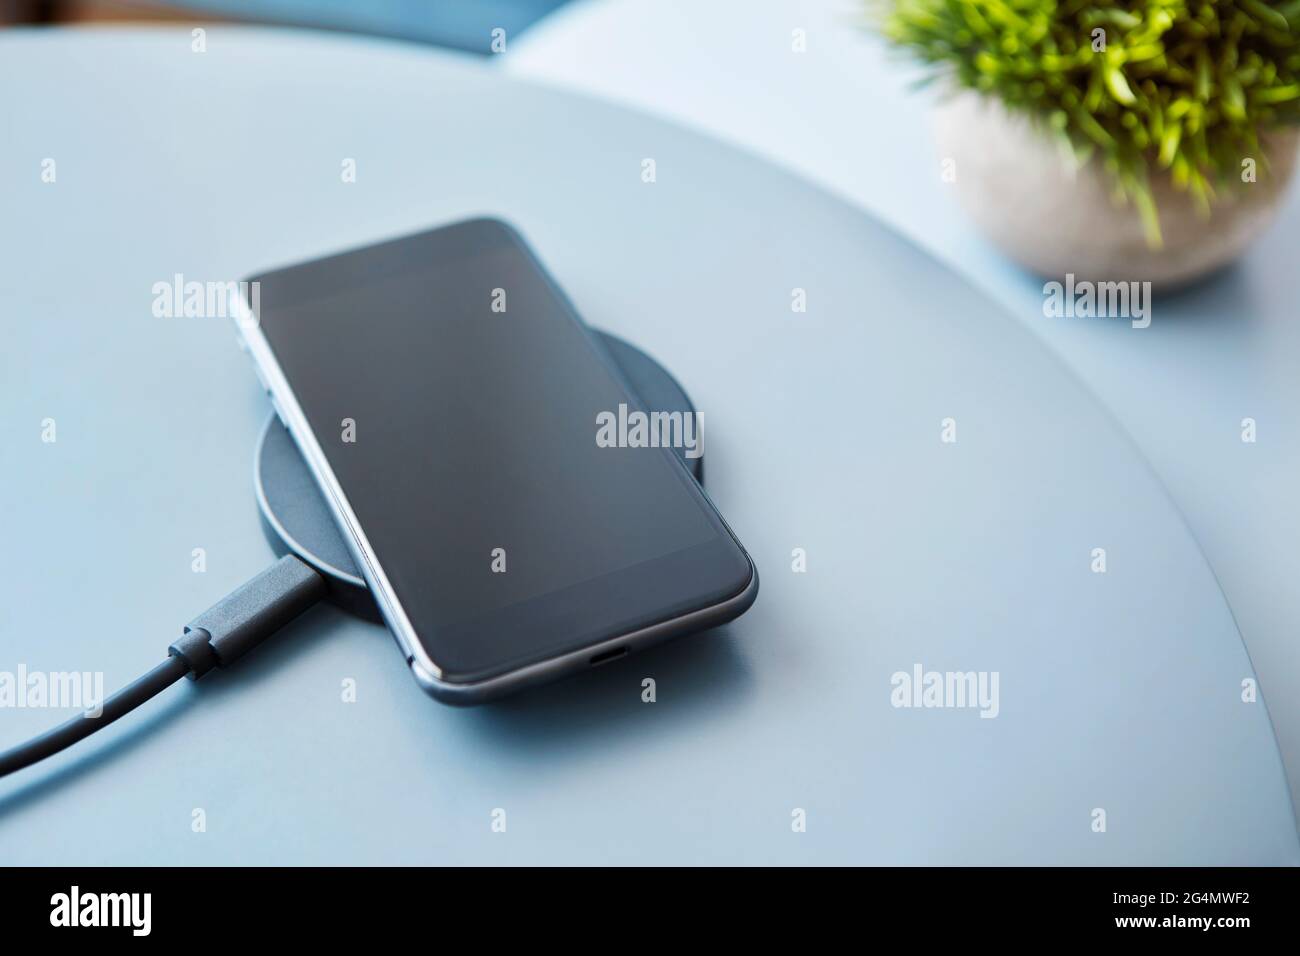 Wireless inductive charging smartphone battery. Electronic communication device against light blue background. Modern technology, wireless device and Stock Photo